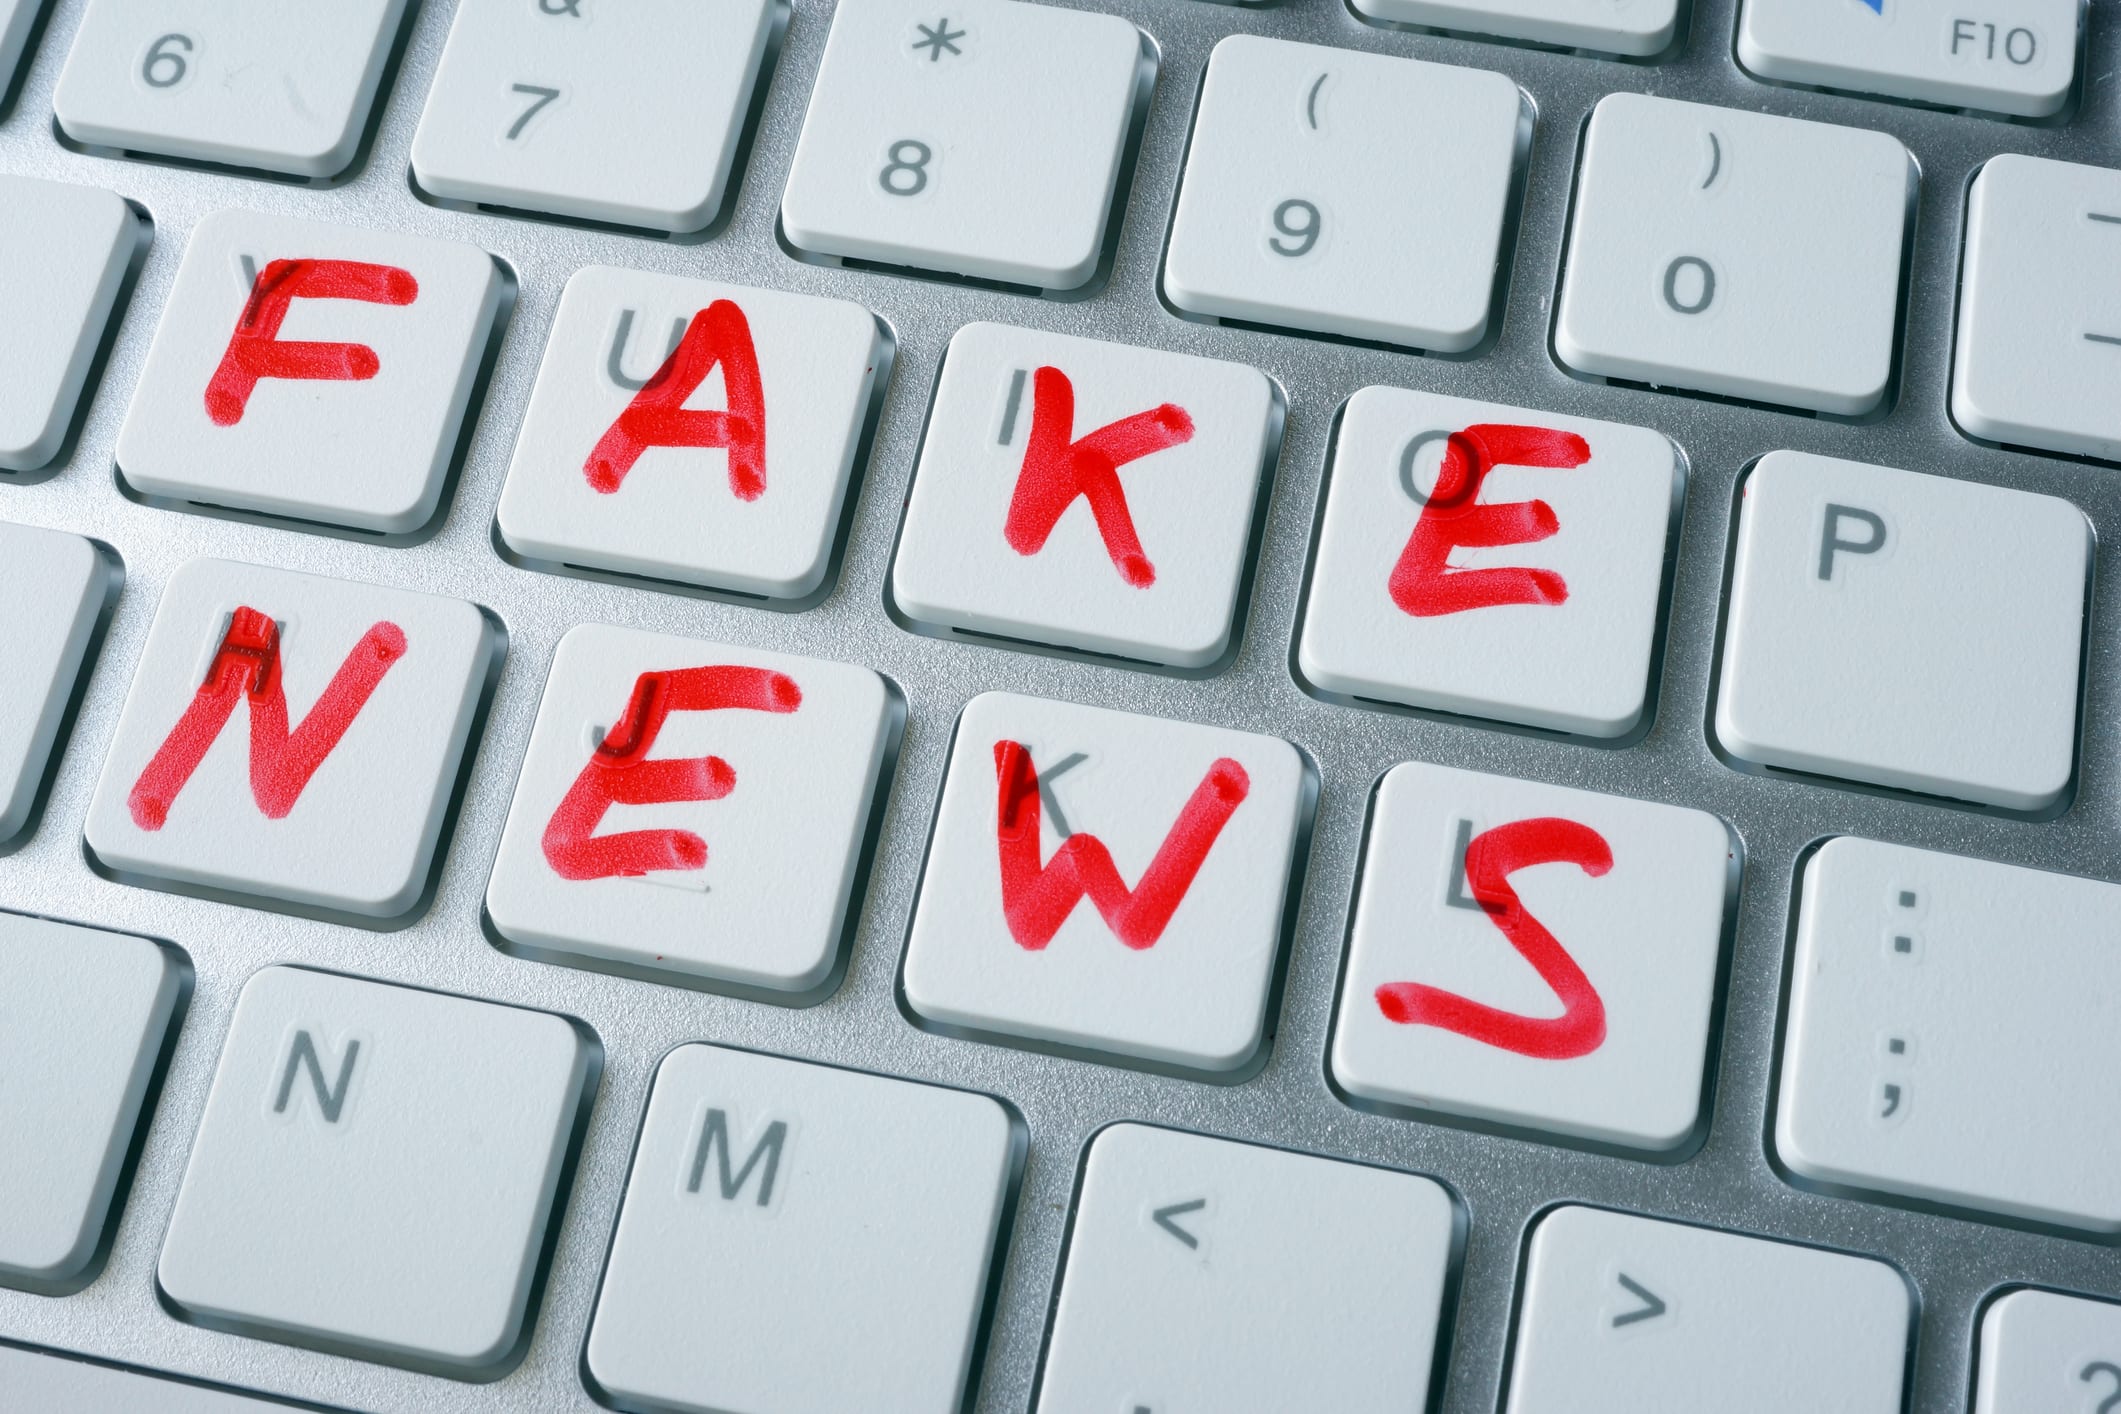 Question 6: Do you check whether the news you read is true or fake?